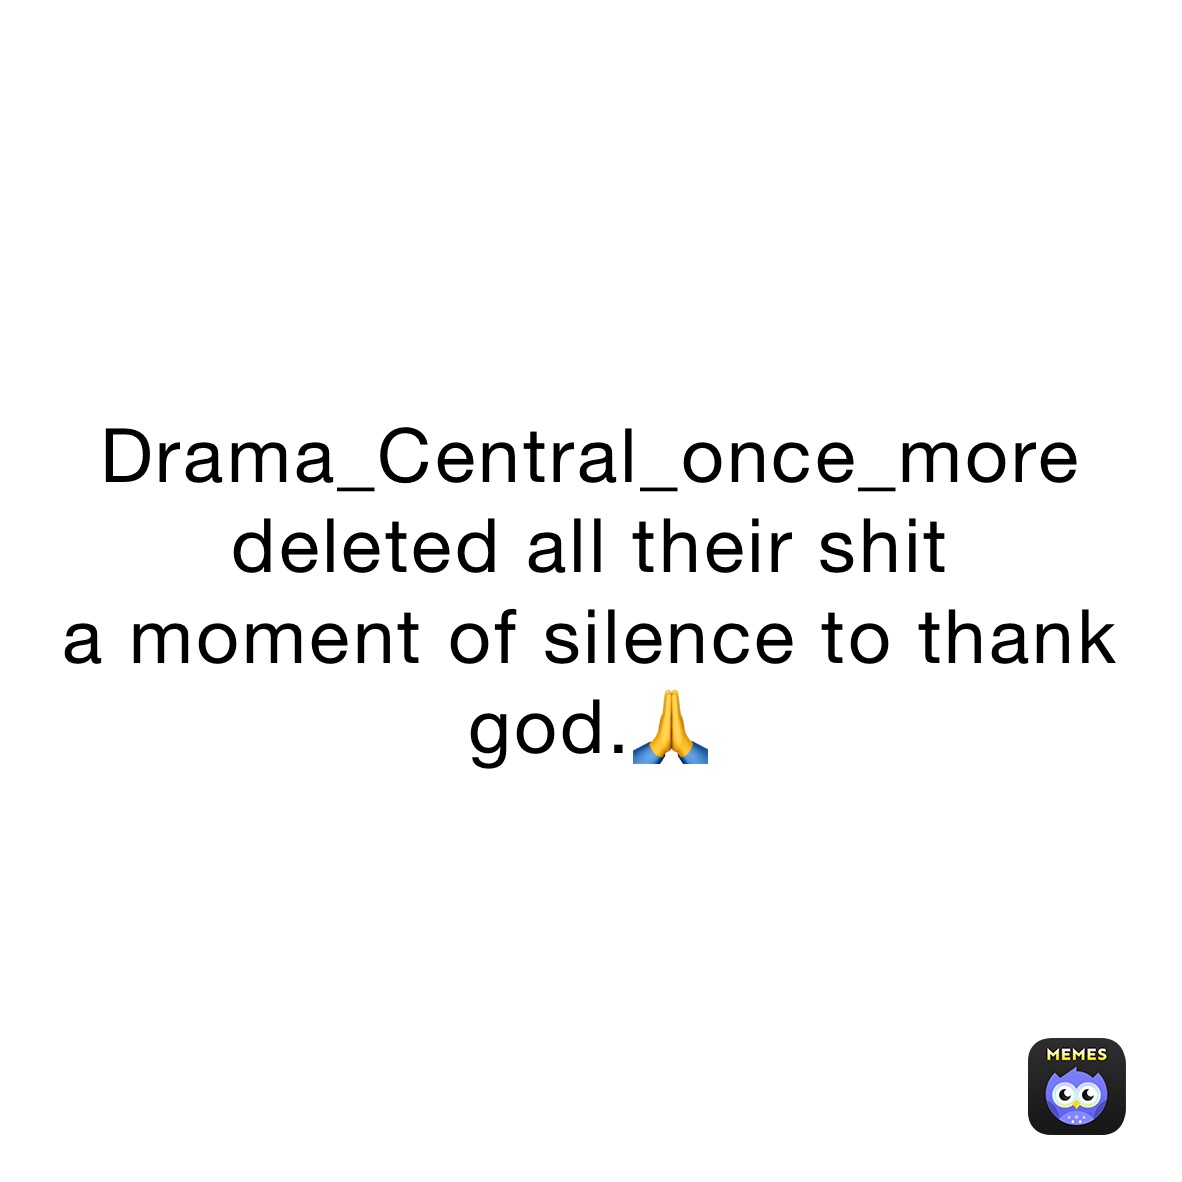 Drama_Central_once_more deleted all their shit 
a moment of silence to thank god.🙏